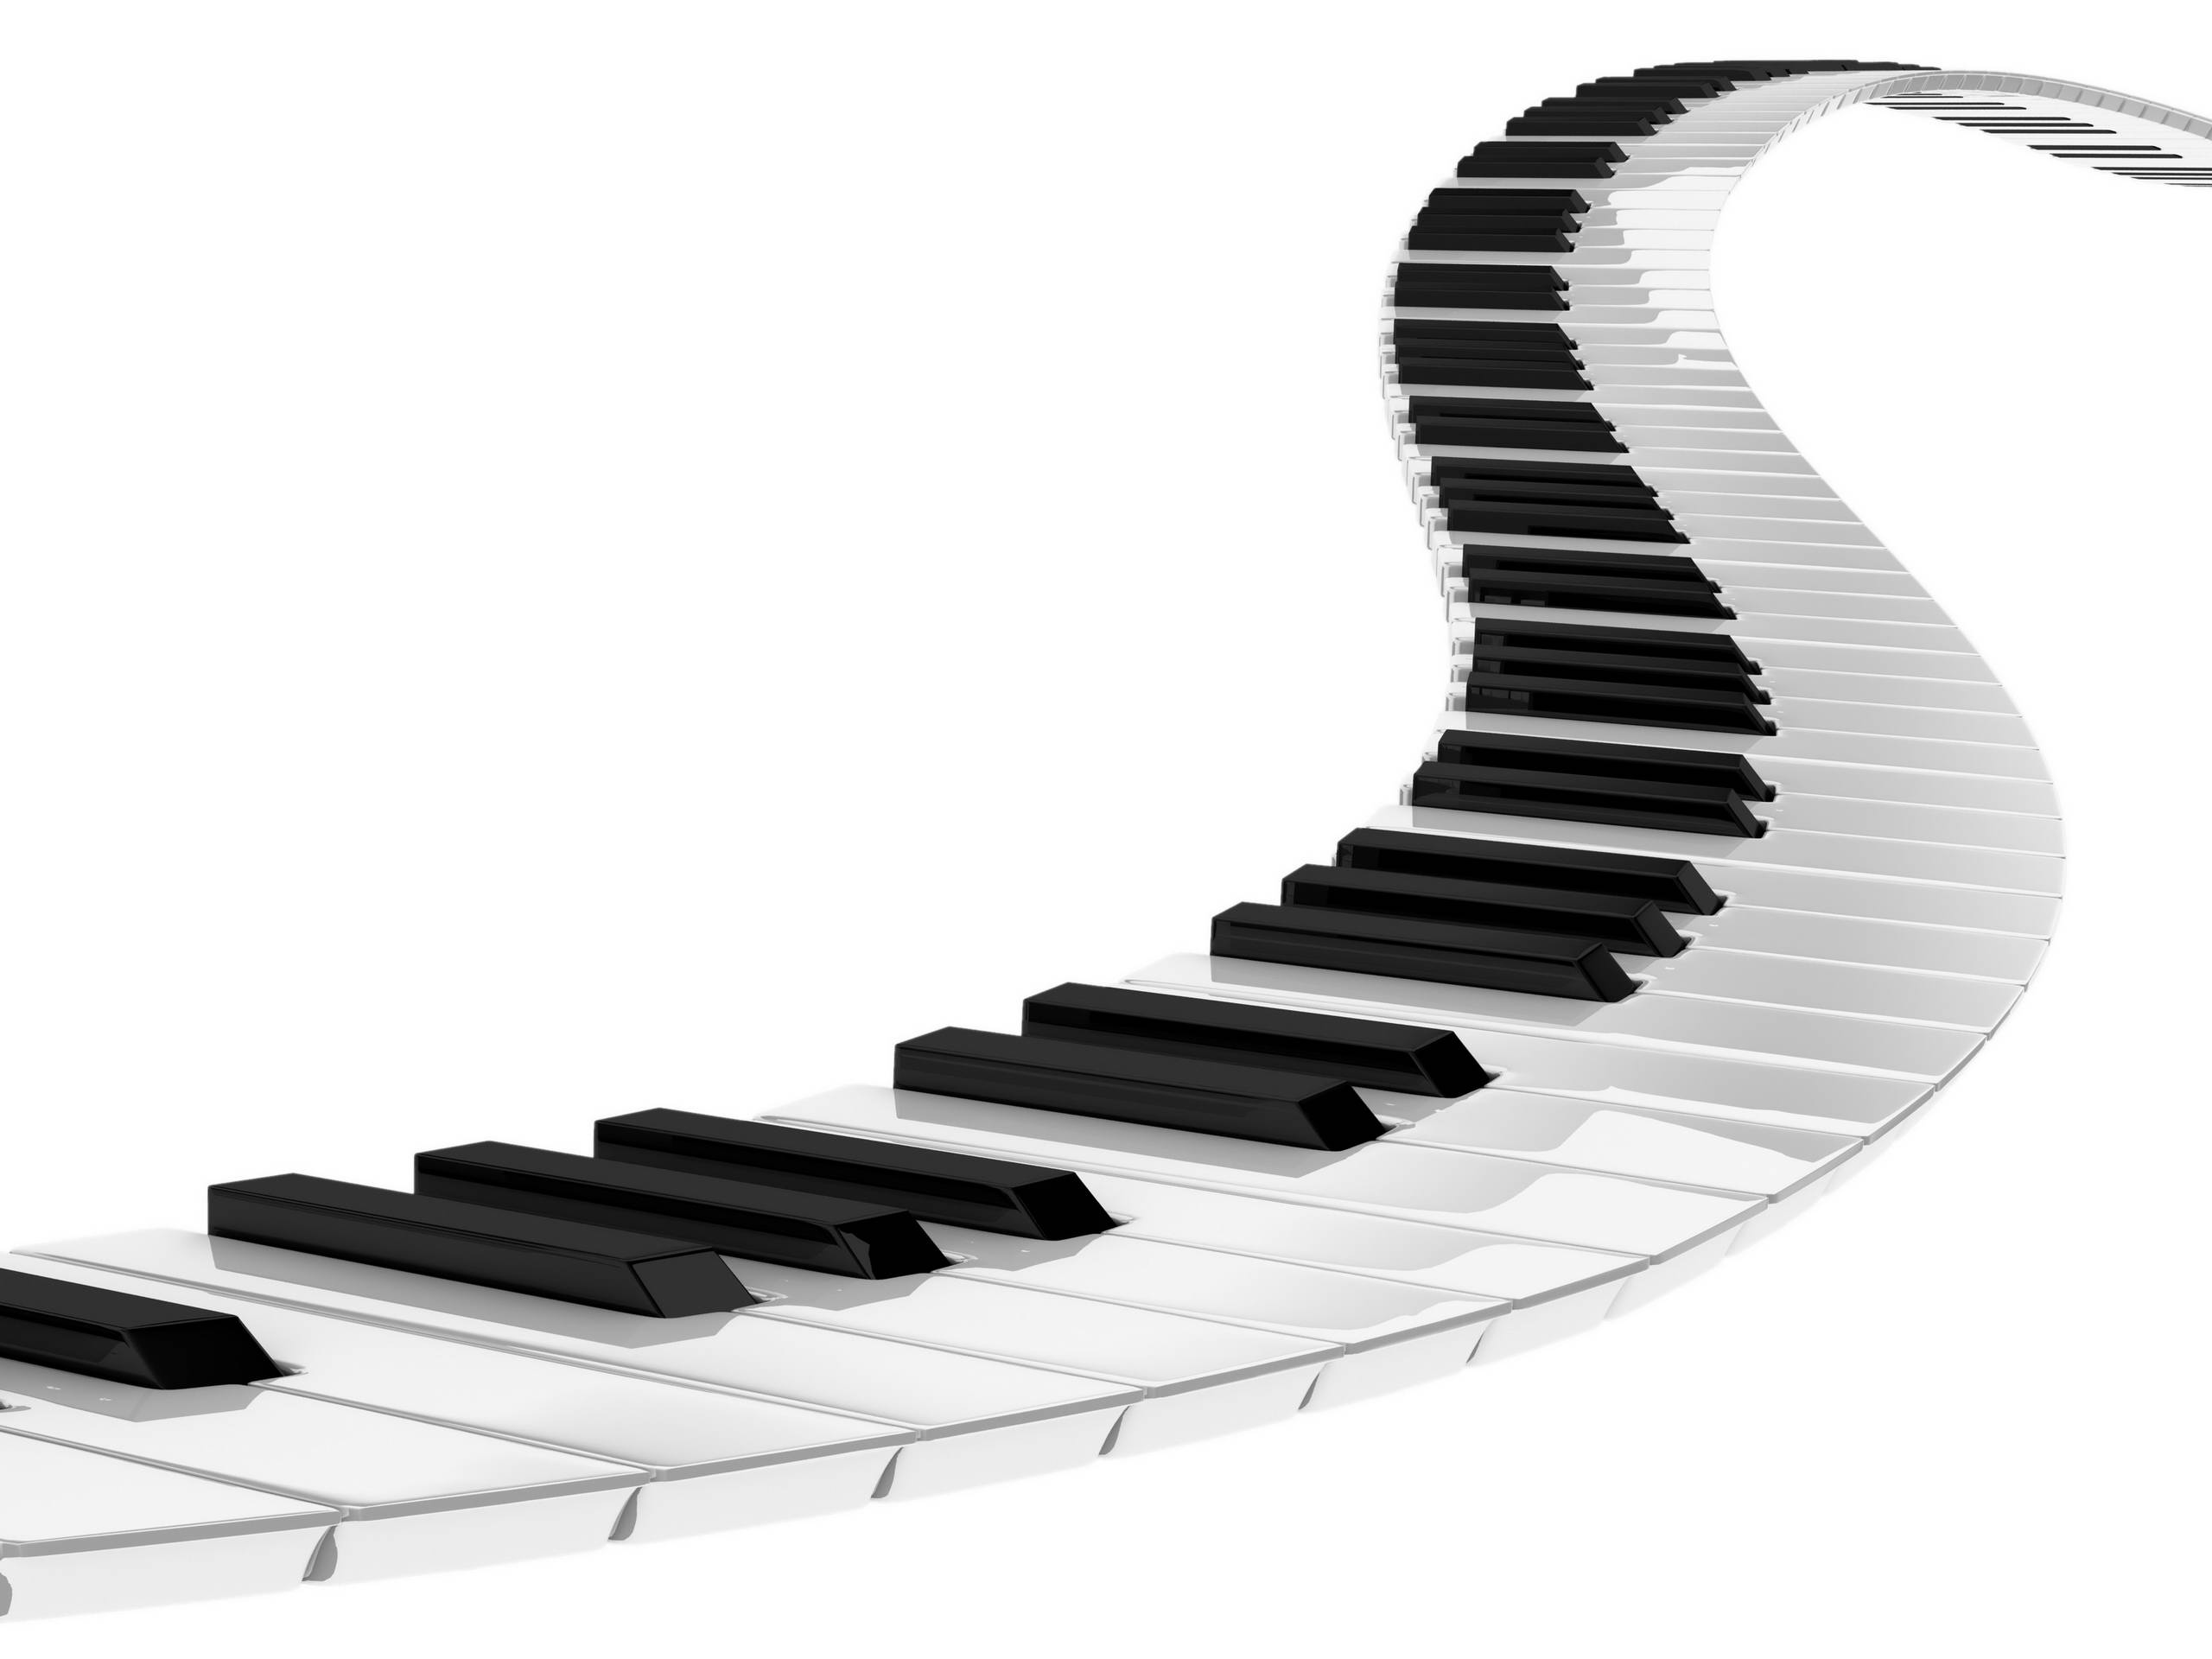 Piano Music Notes Wallpaper 8736 Hd Wallpapers in Music   Imagescicom